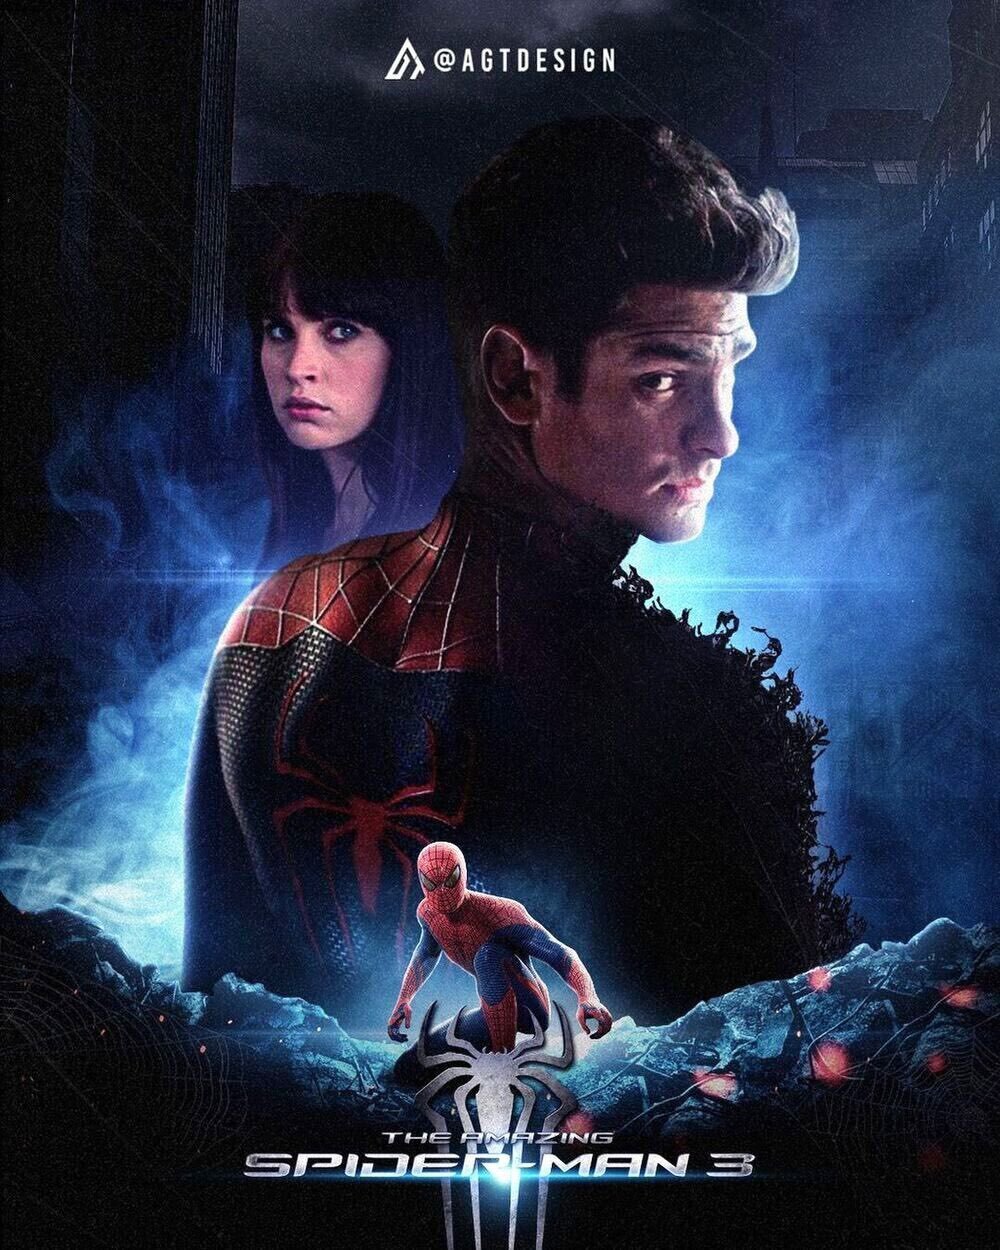 How Would You Feel About An Amazing Spiderman Gen Discussion